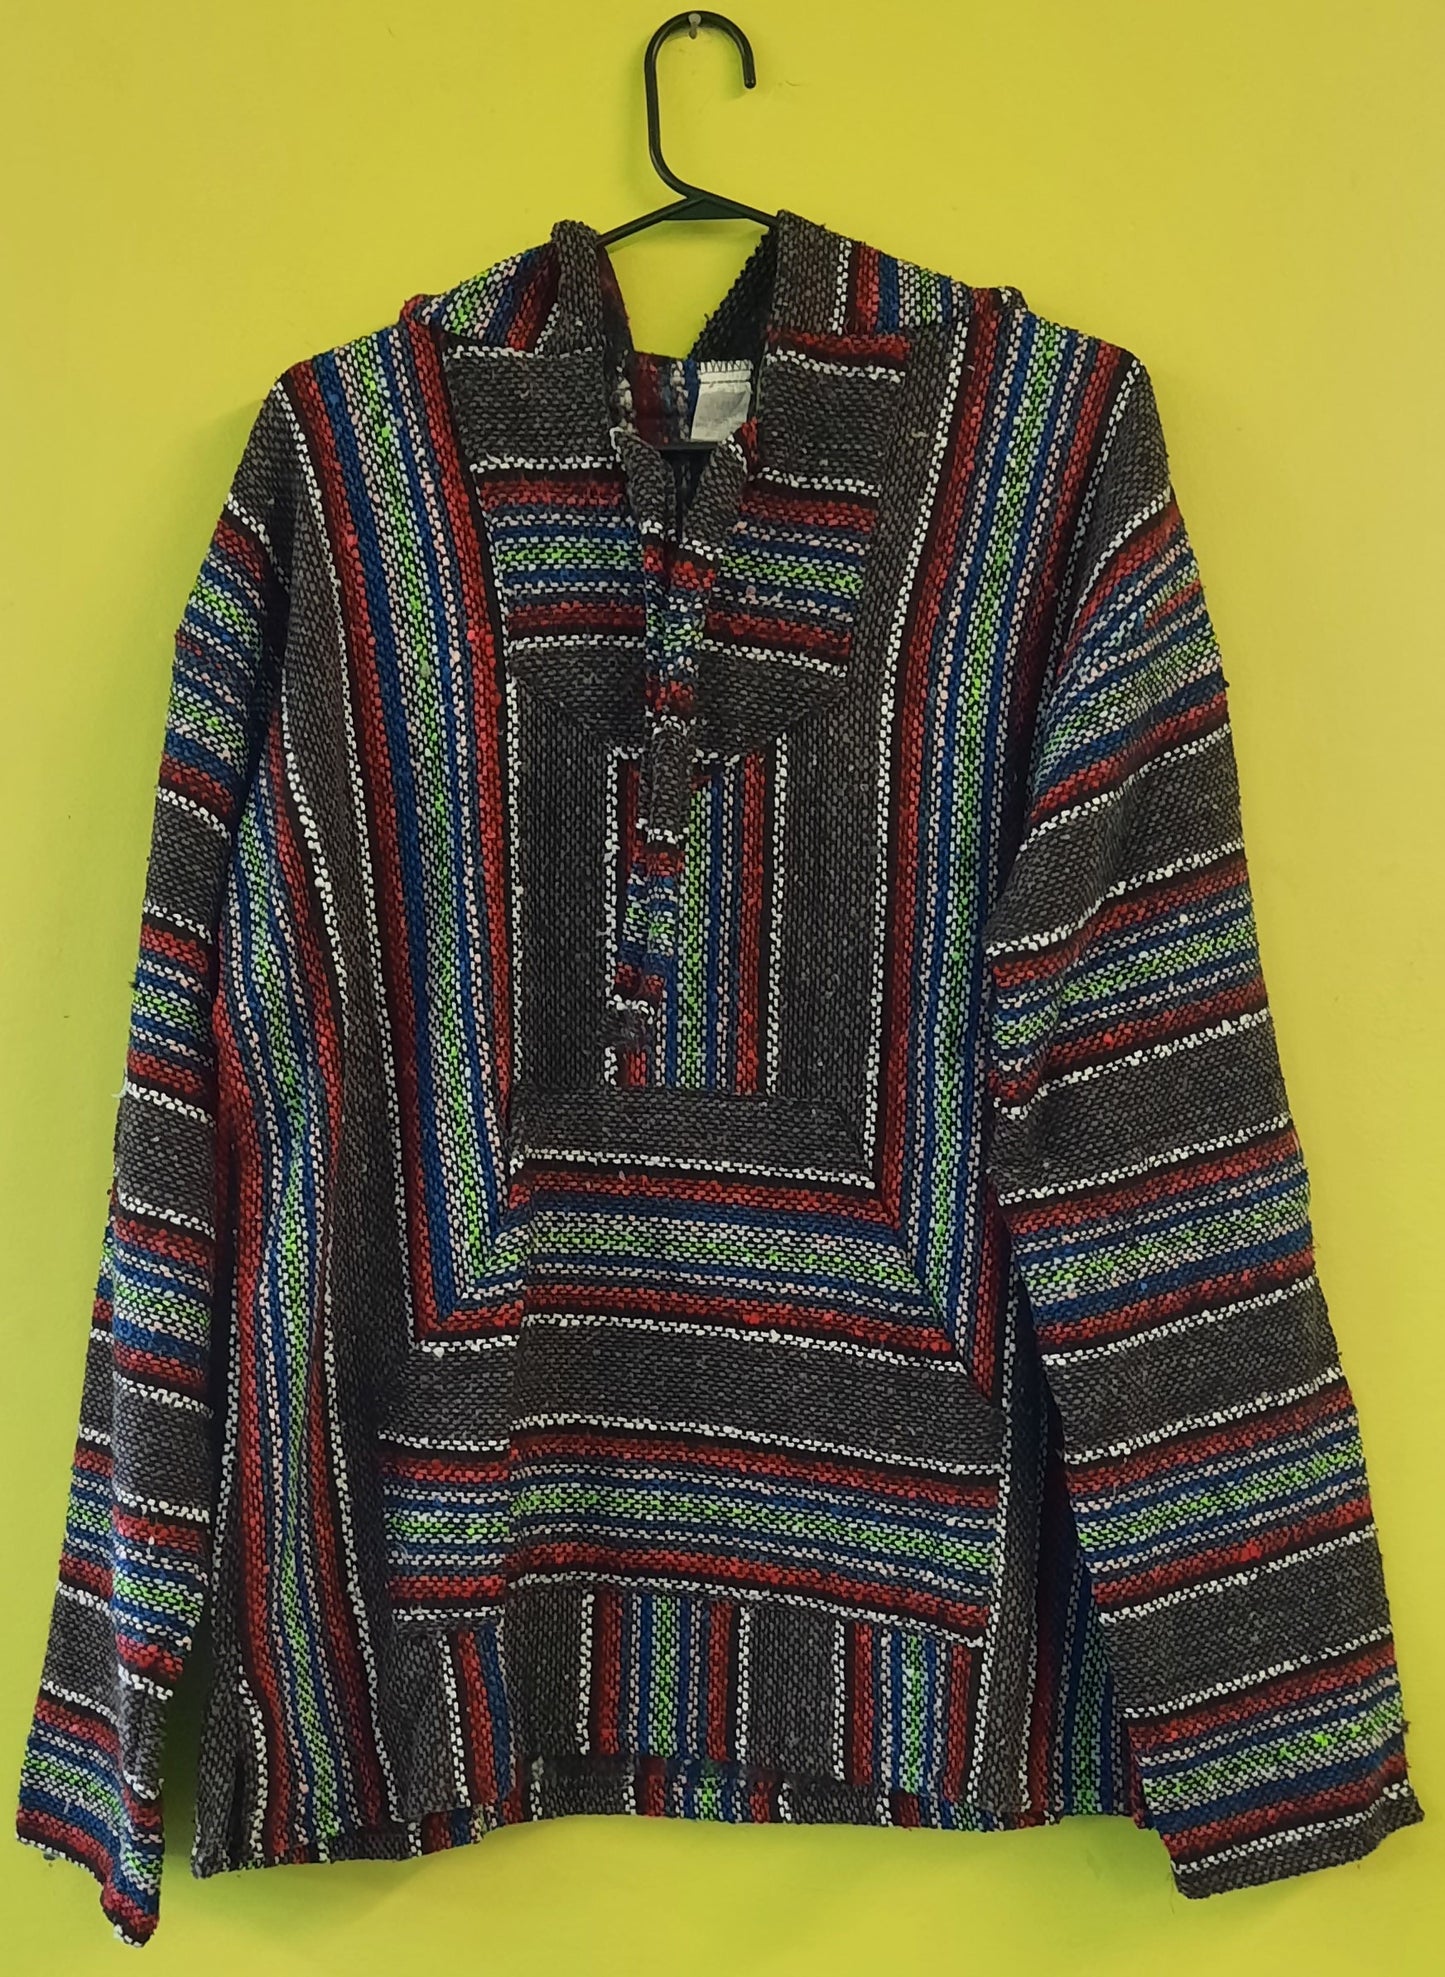 Mexican Hooded Baja Poncho - Large Grey/Multi